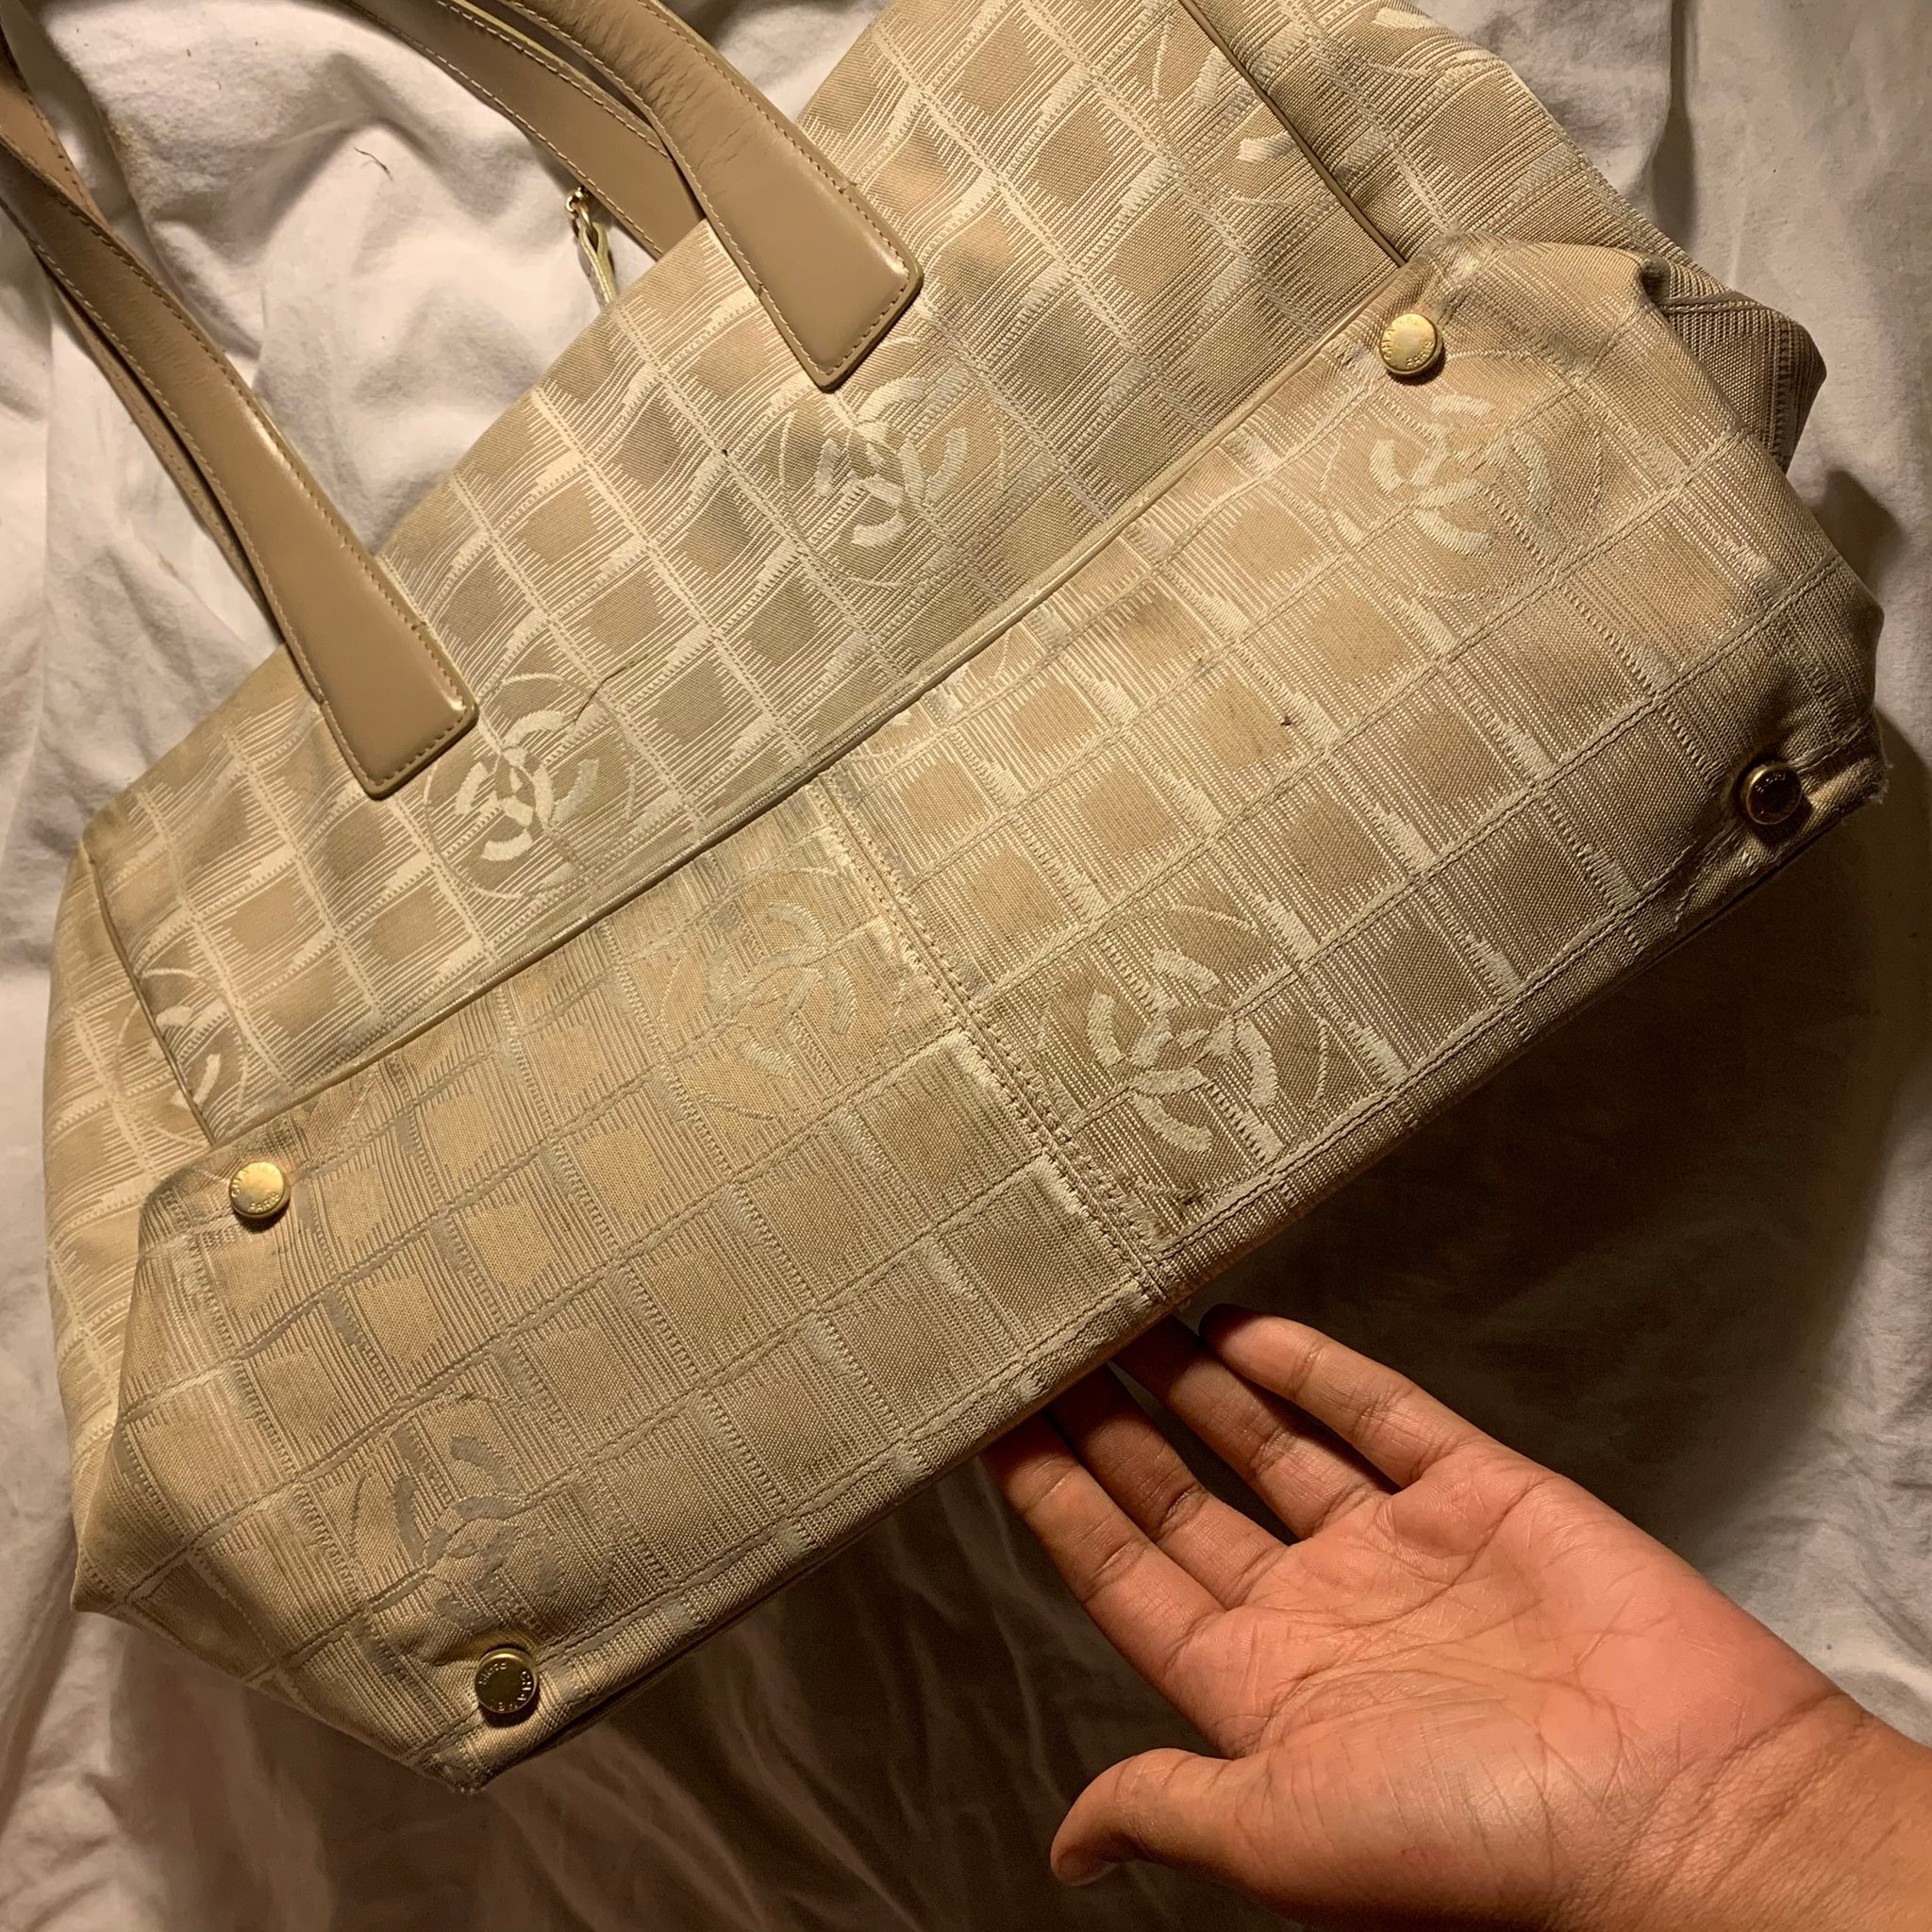 price of chanel tote bag